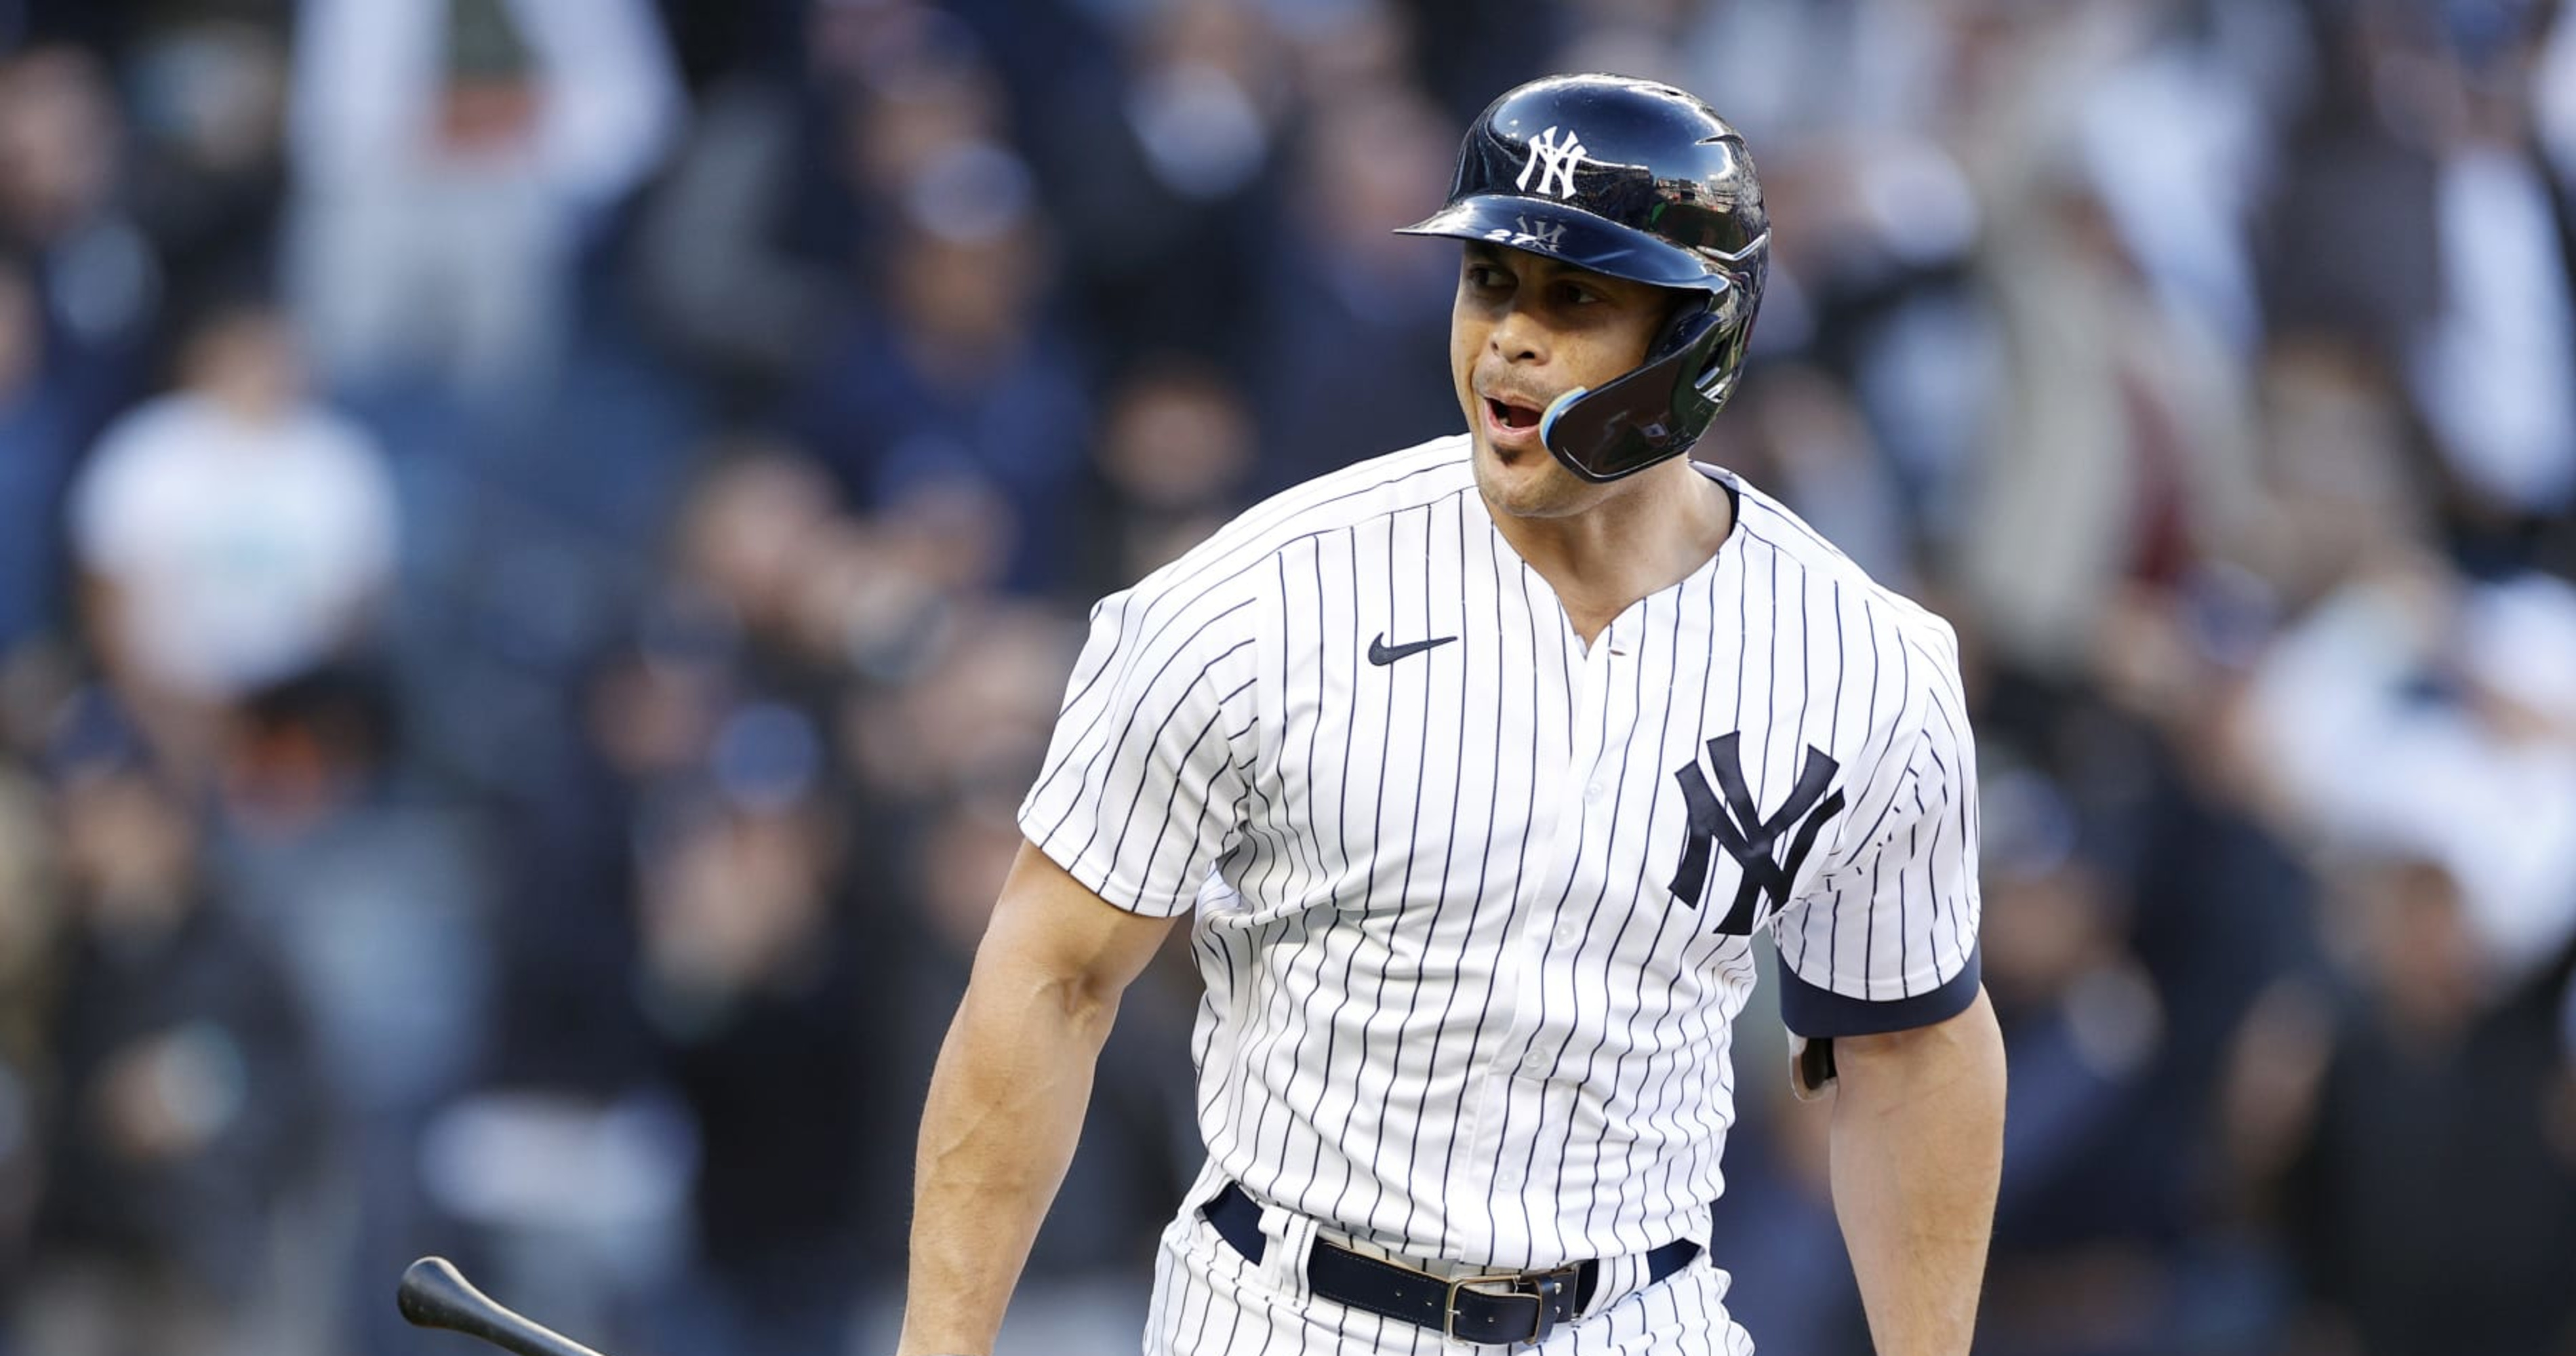 Giancarlo Stanton blasts two home runs as Yankees beat Cubs